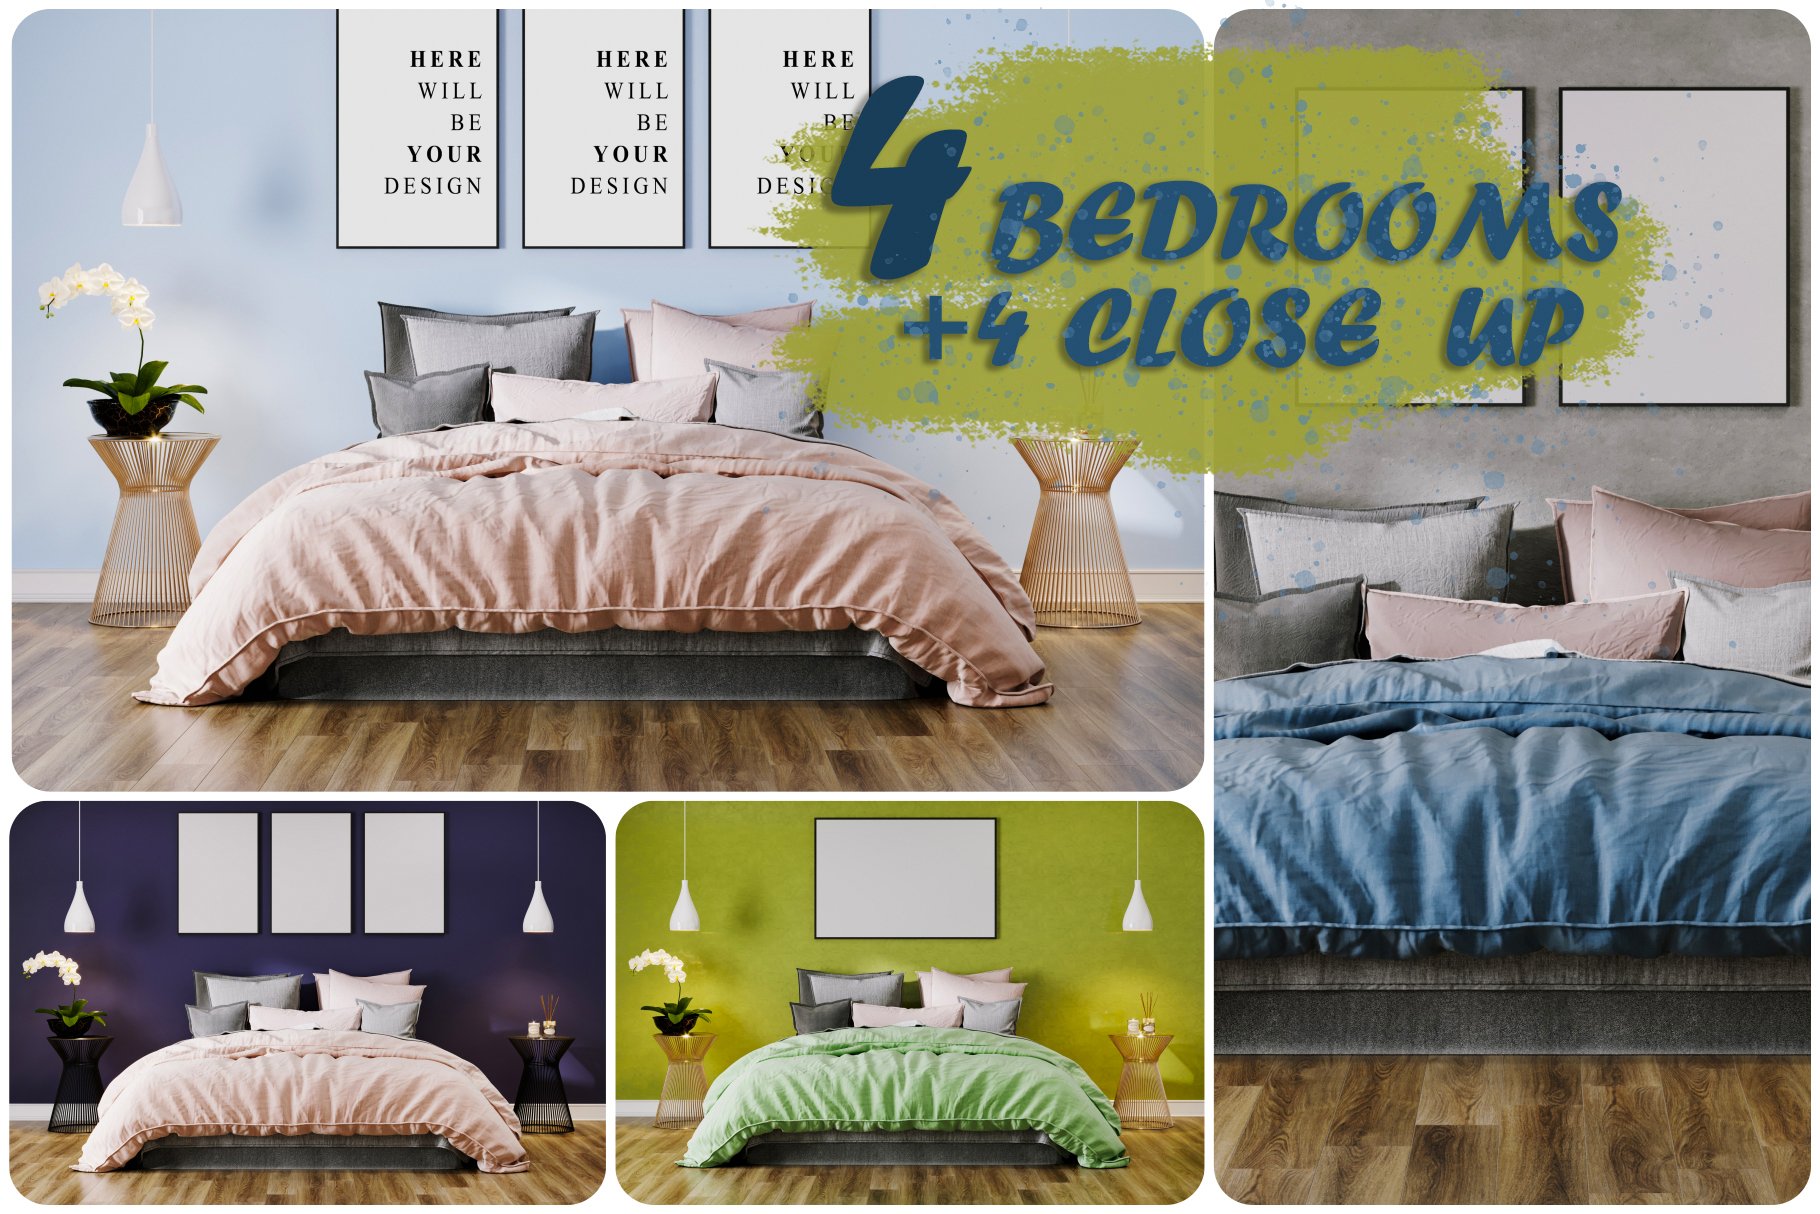 Colorful template with some bedrooms options.